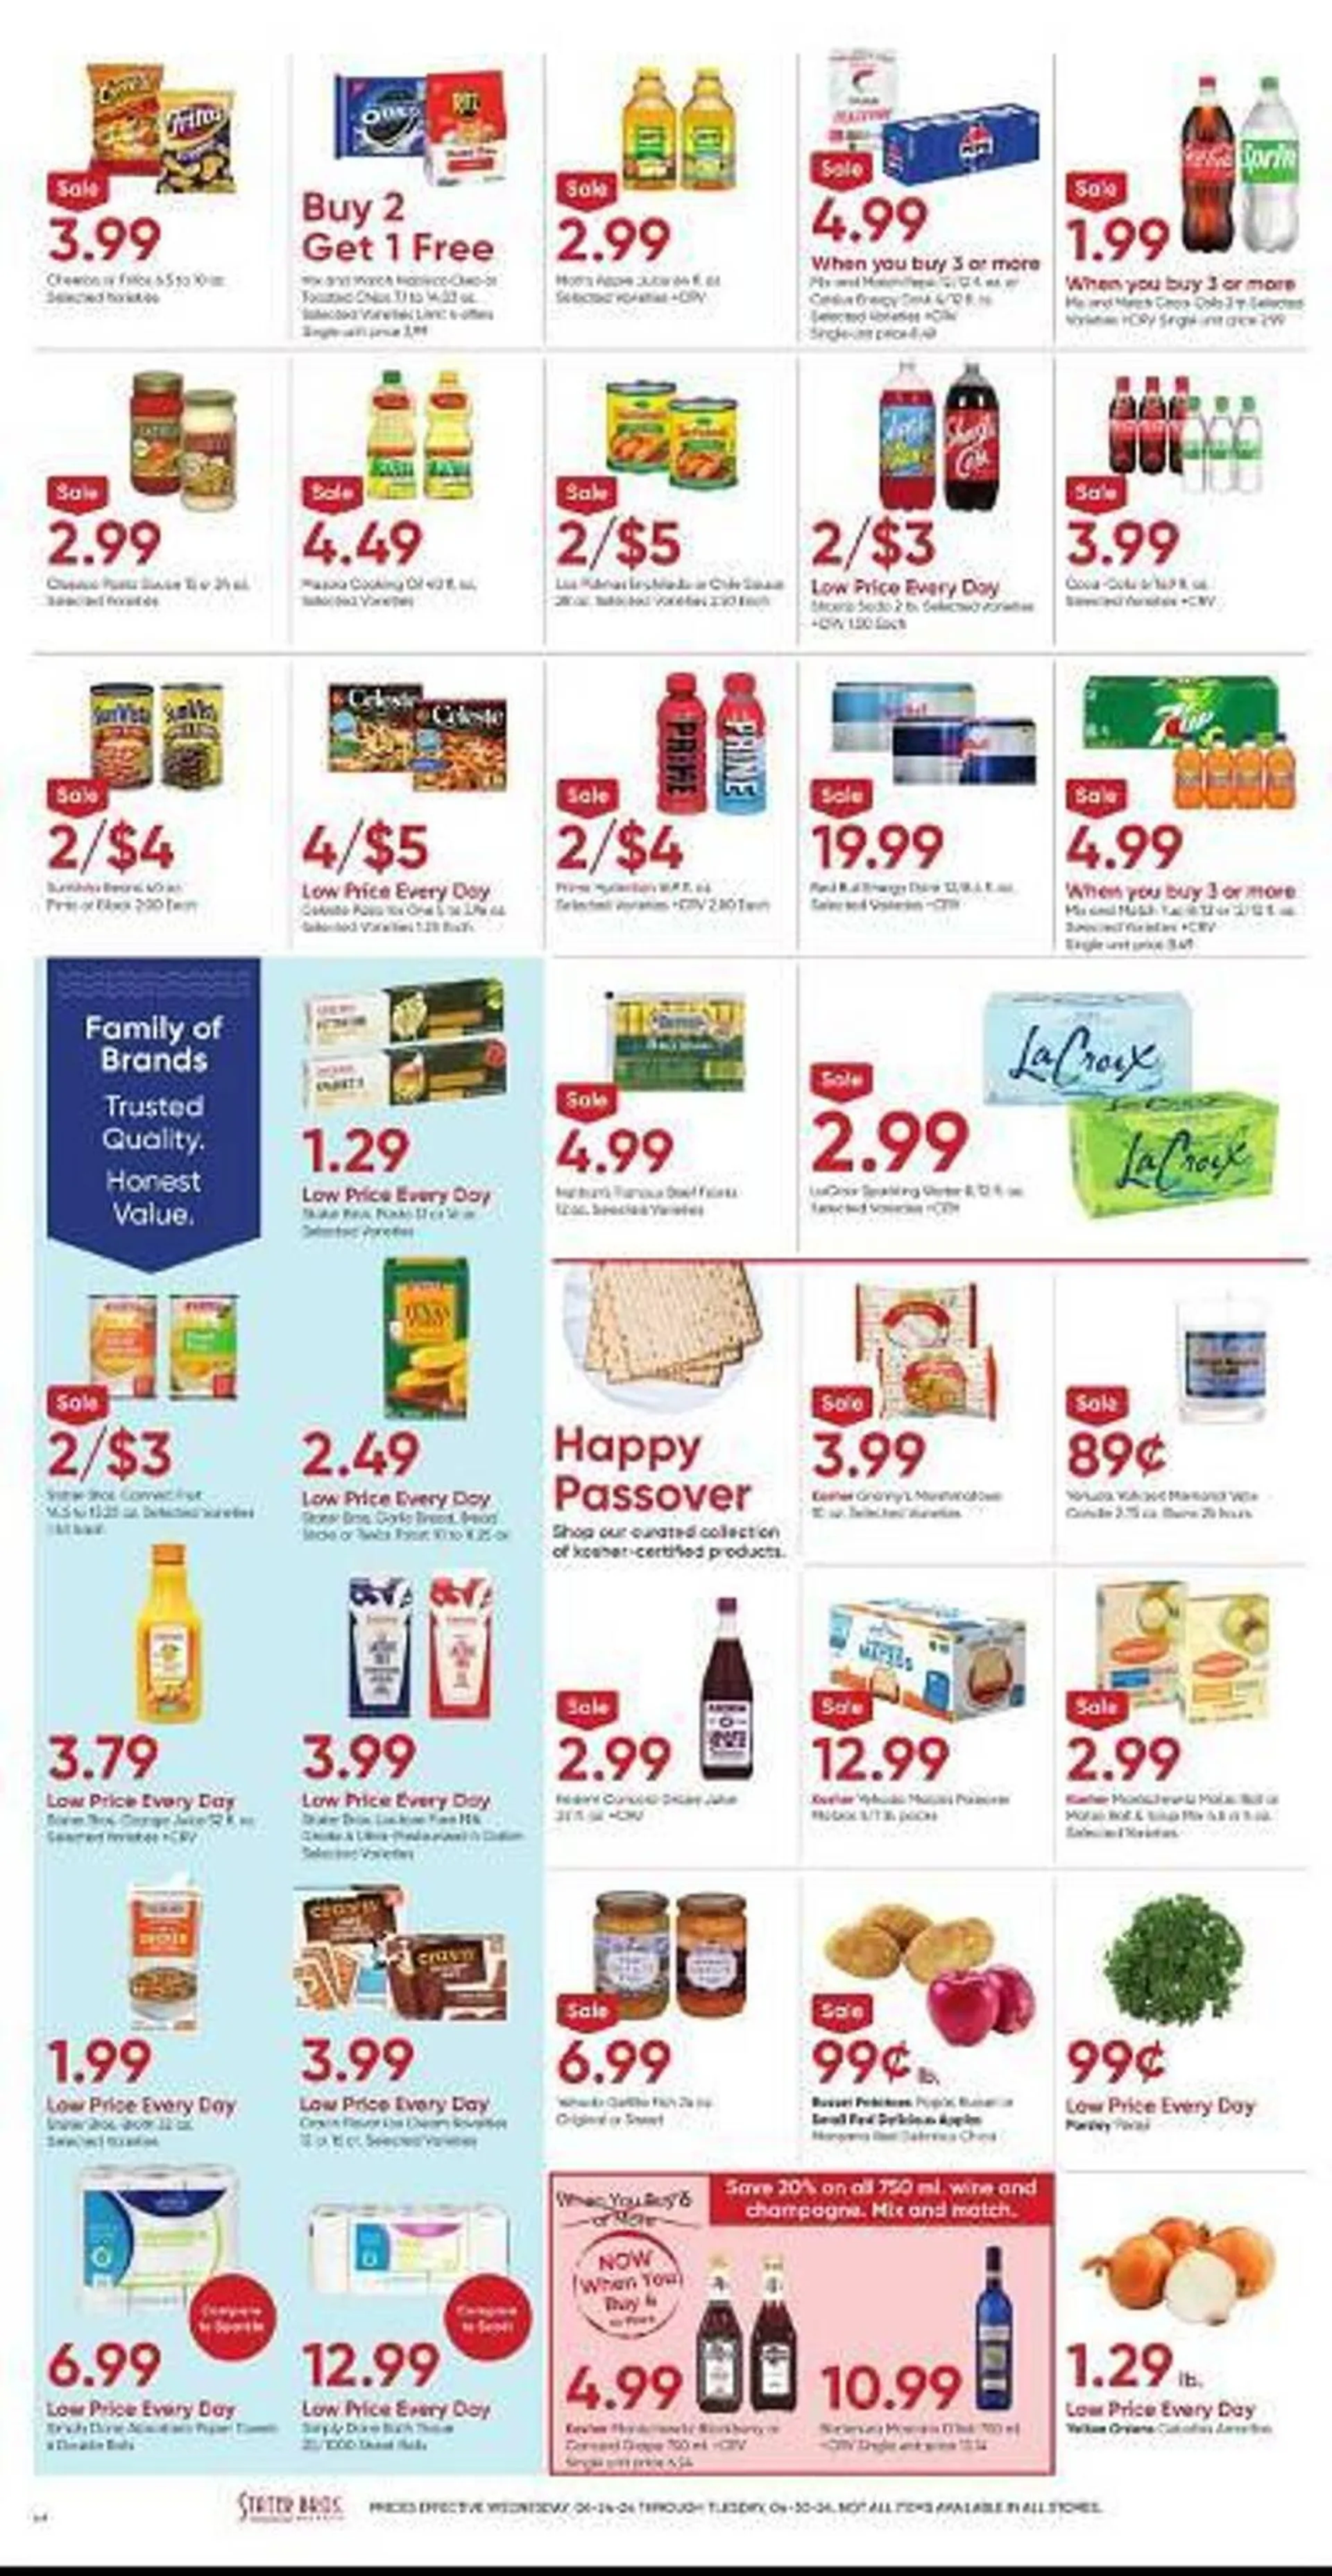 Stater Bros Weekly Ad - 2